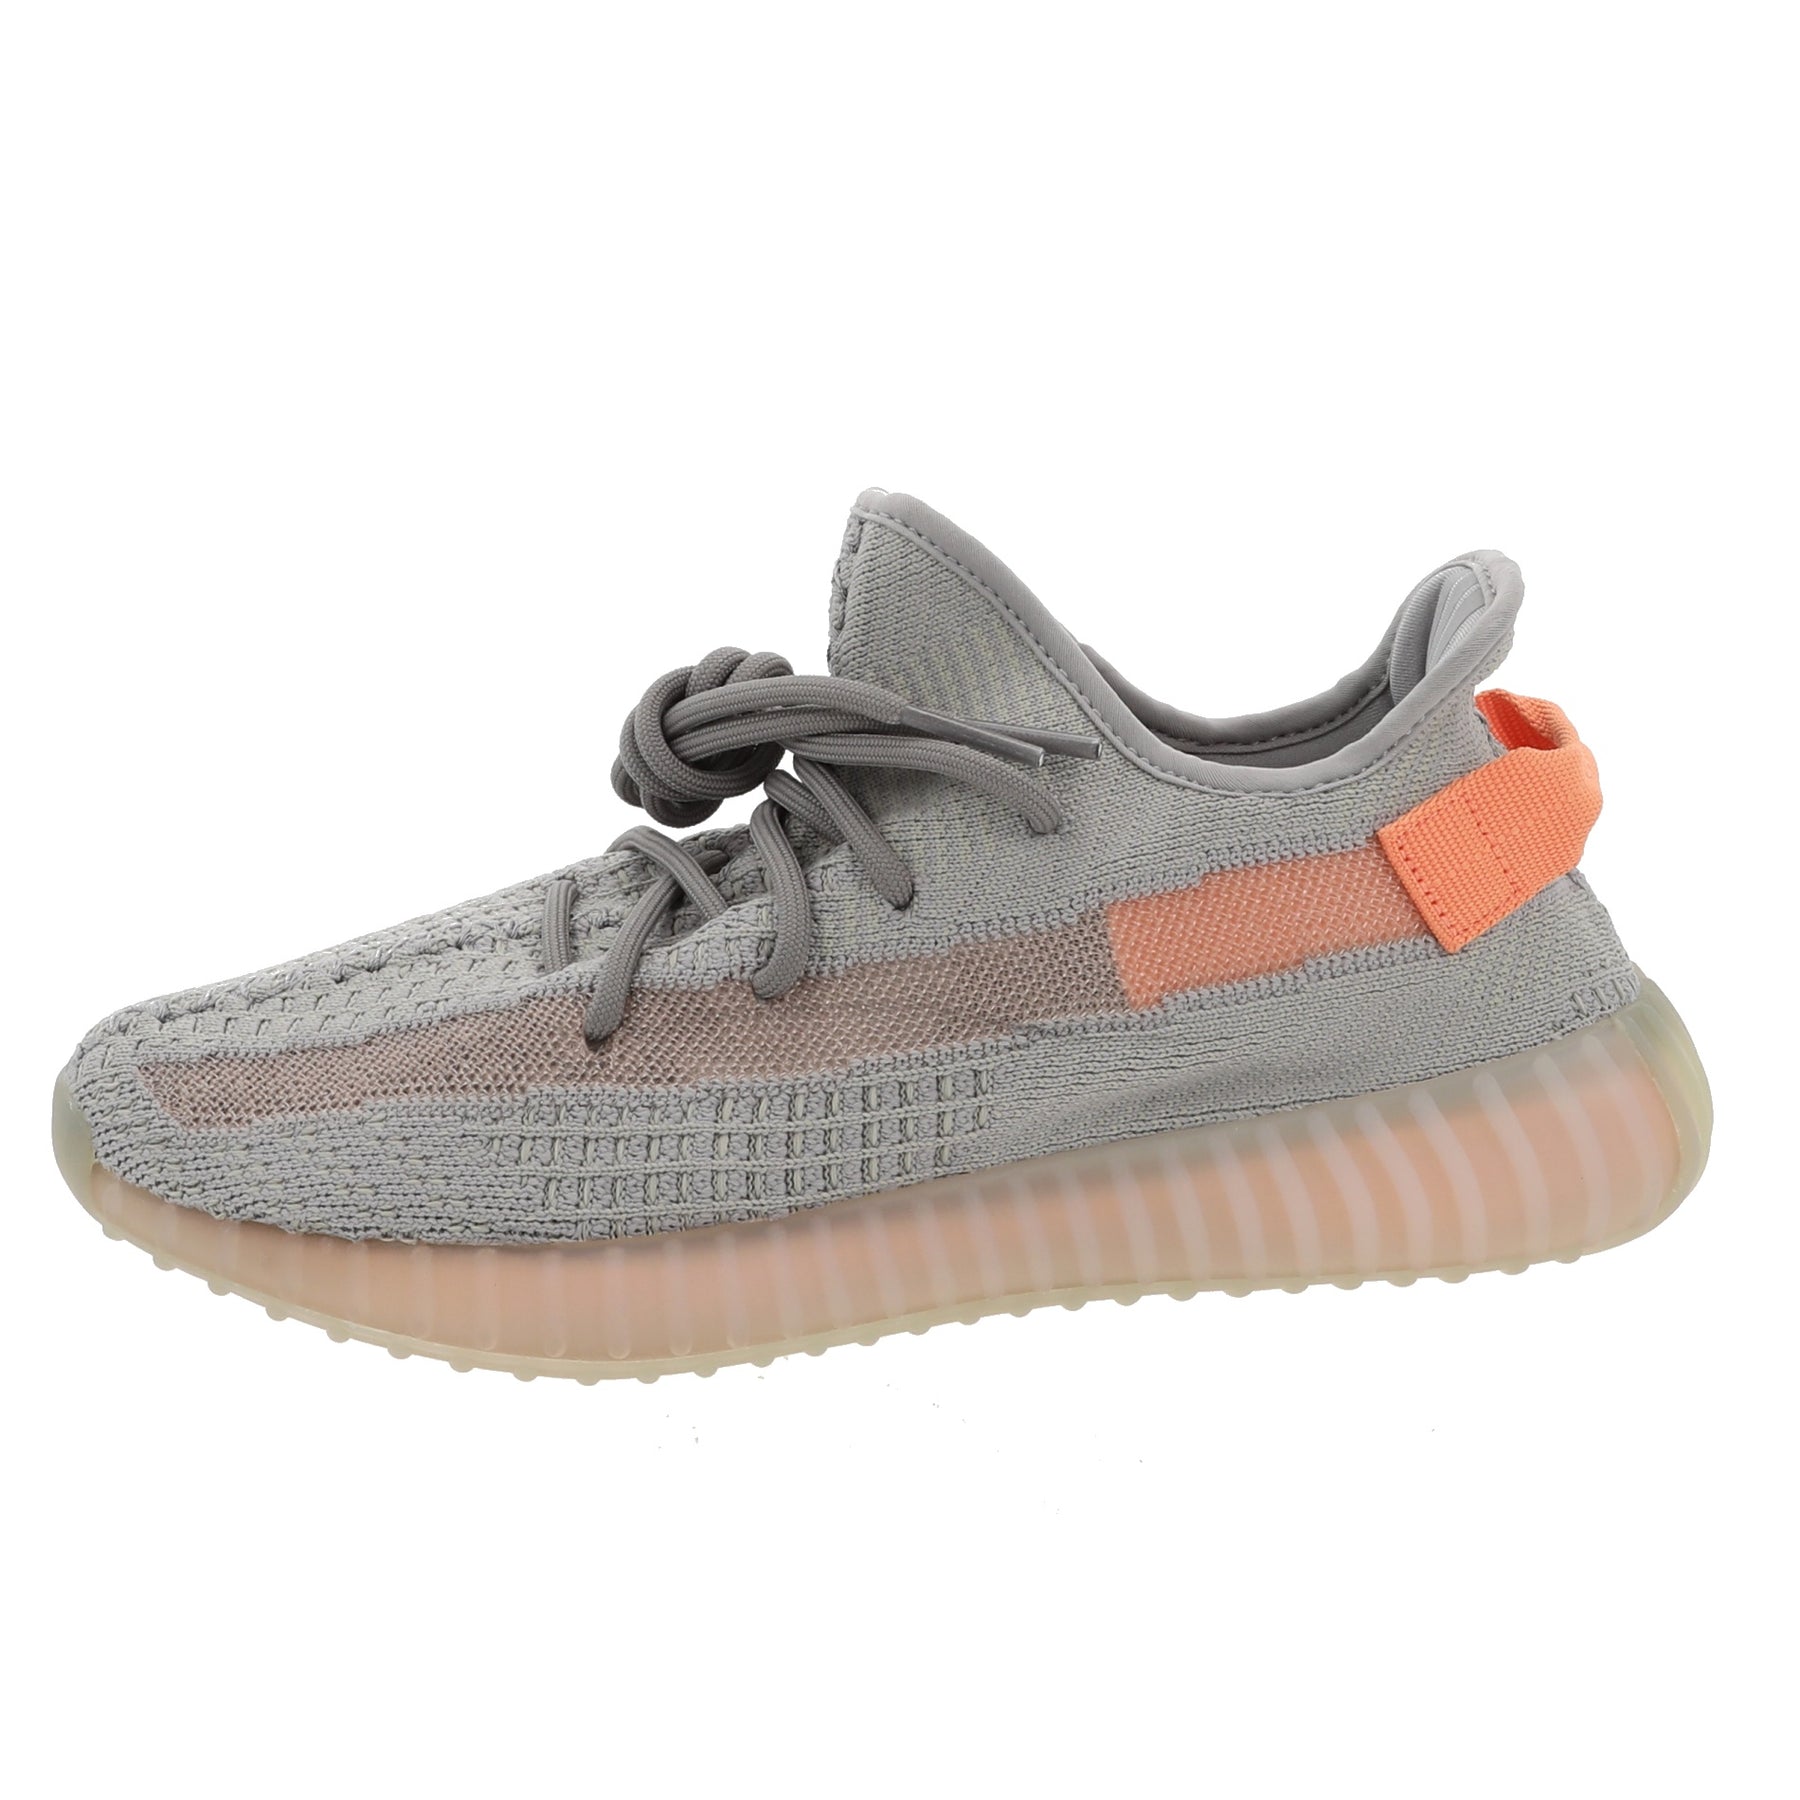 Yeezy Boost 350 V2 Trfrm – Lux